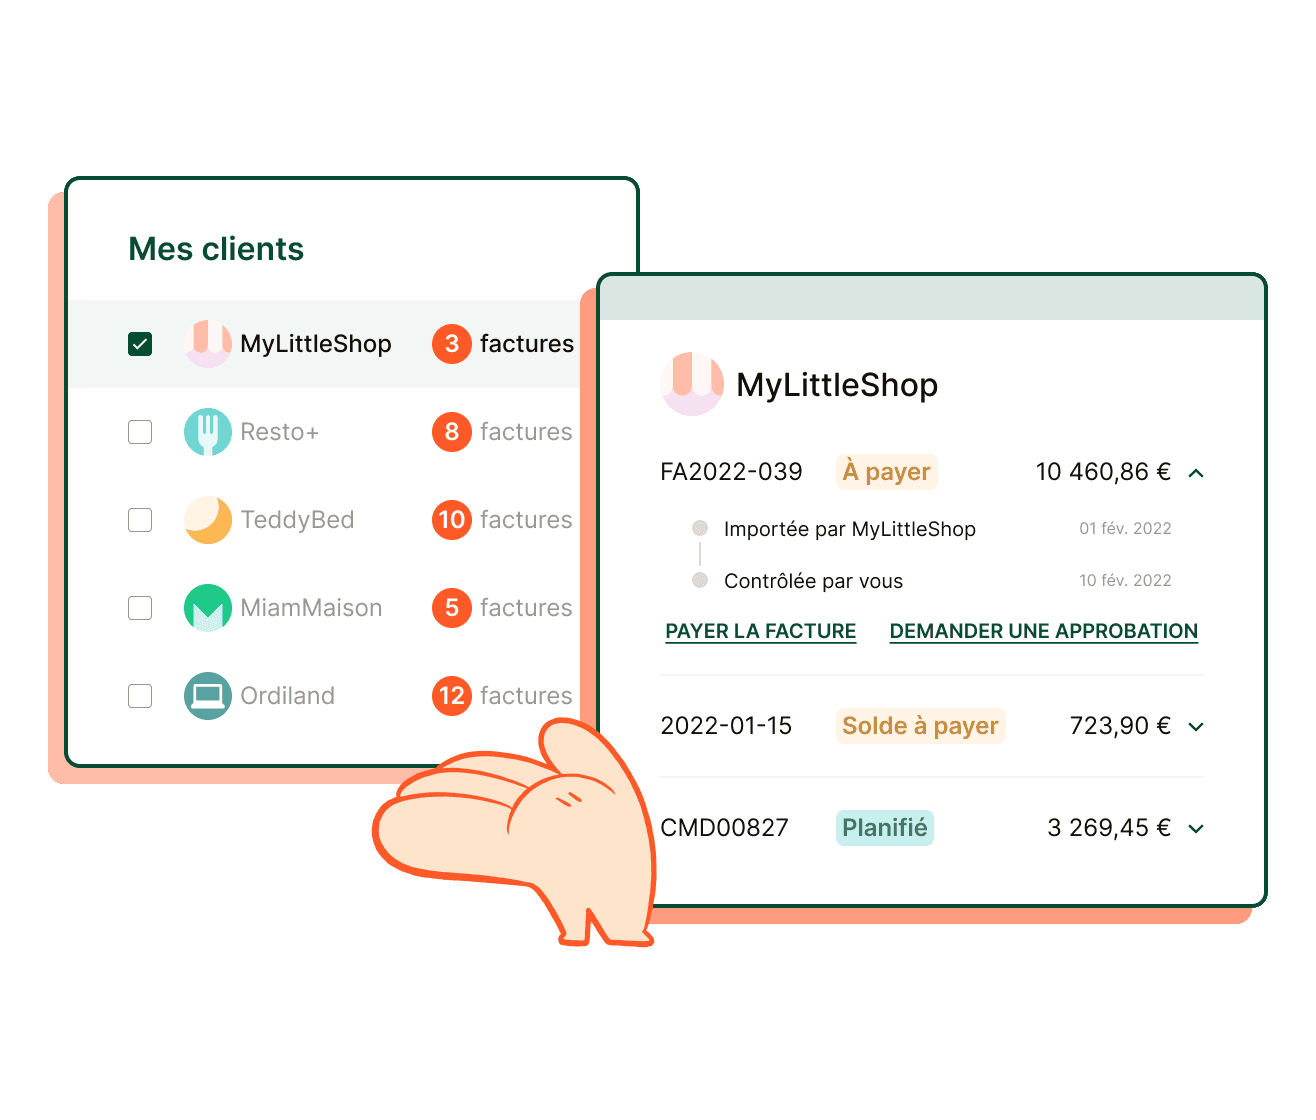 TRACK YOUR PAYMENT'S STATUS